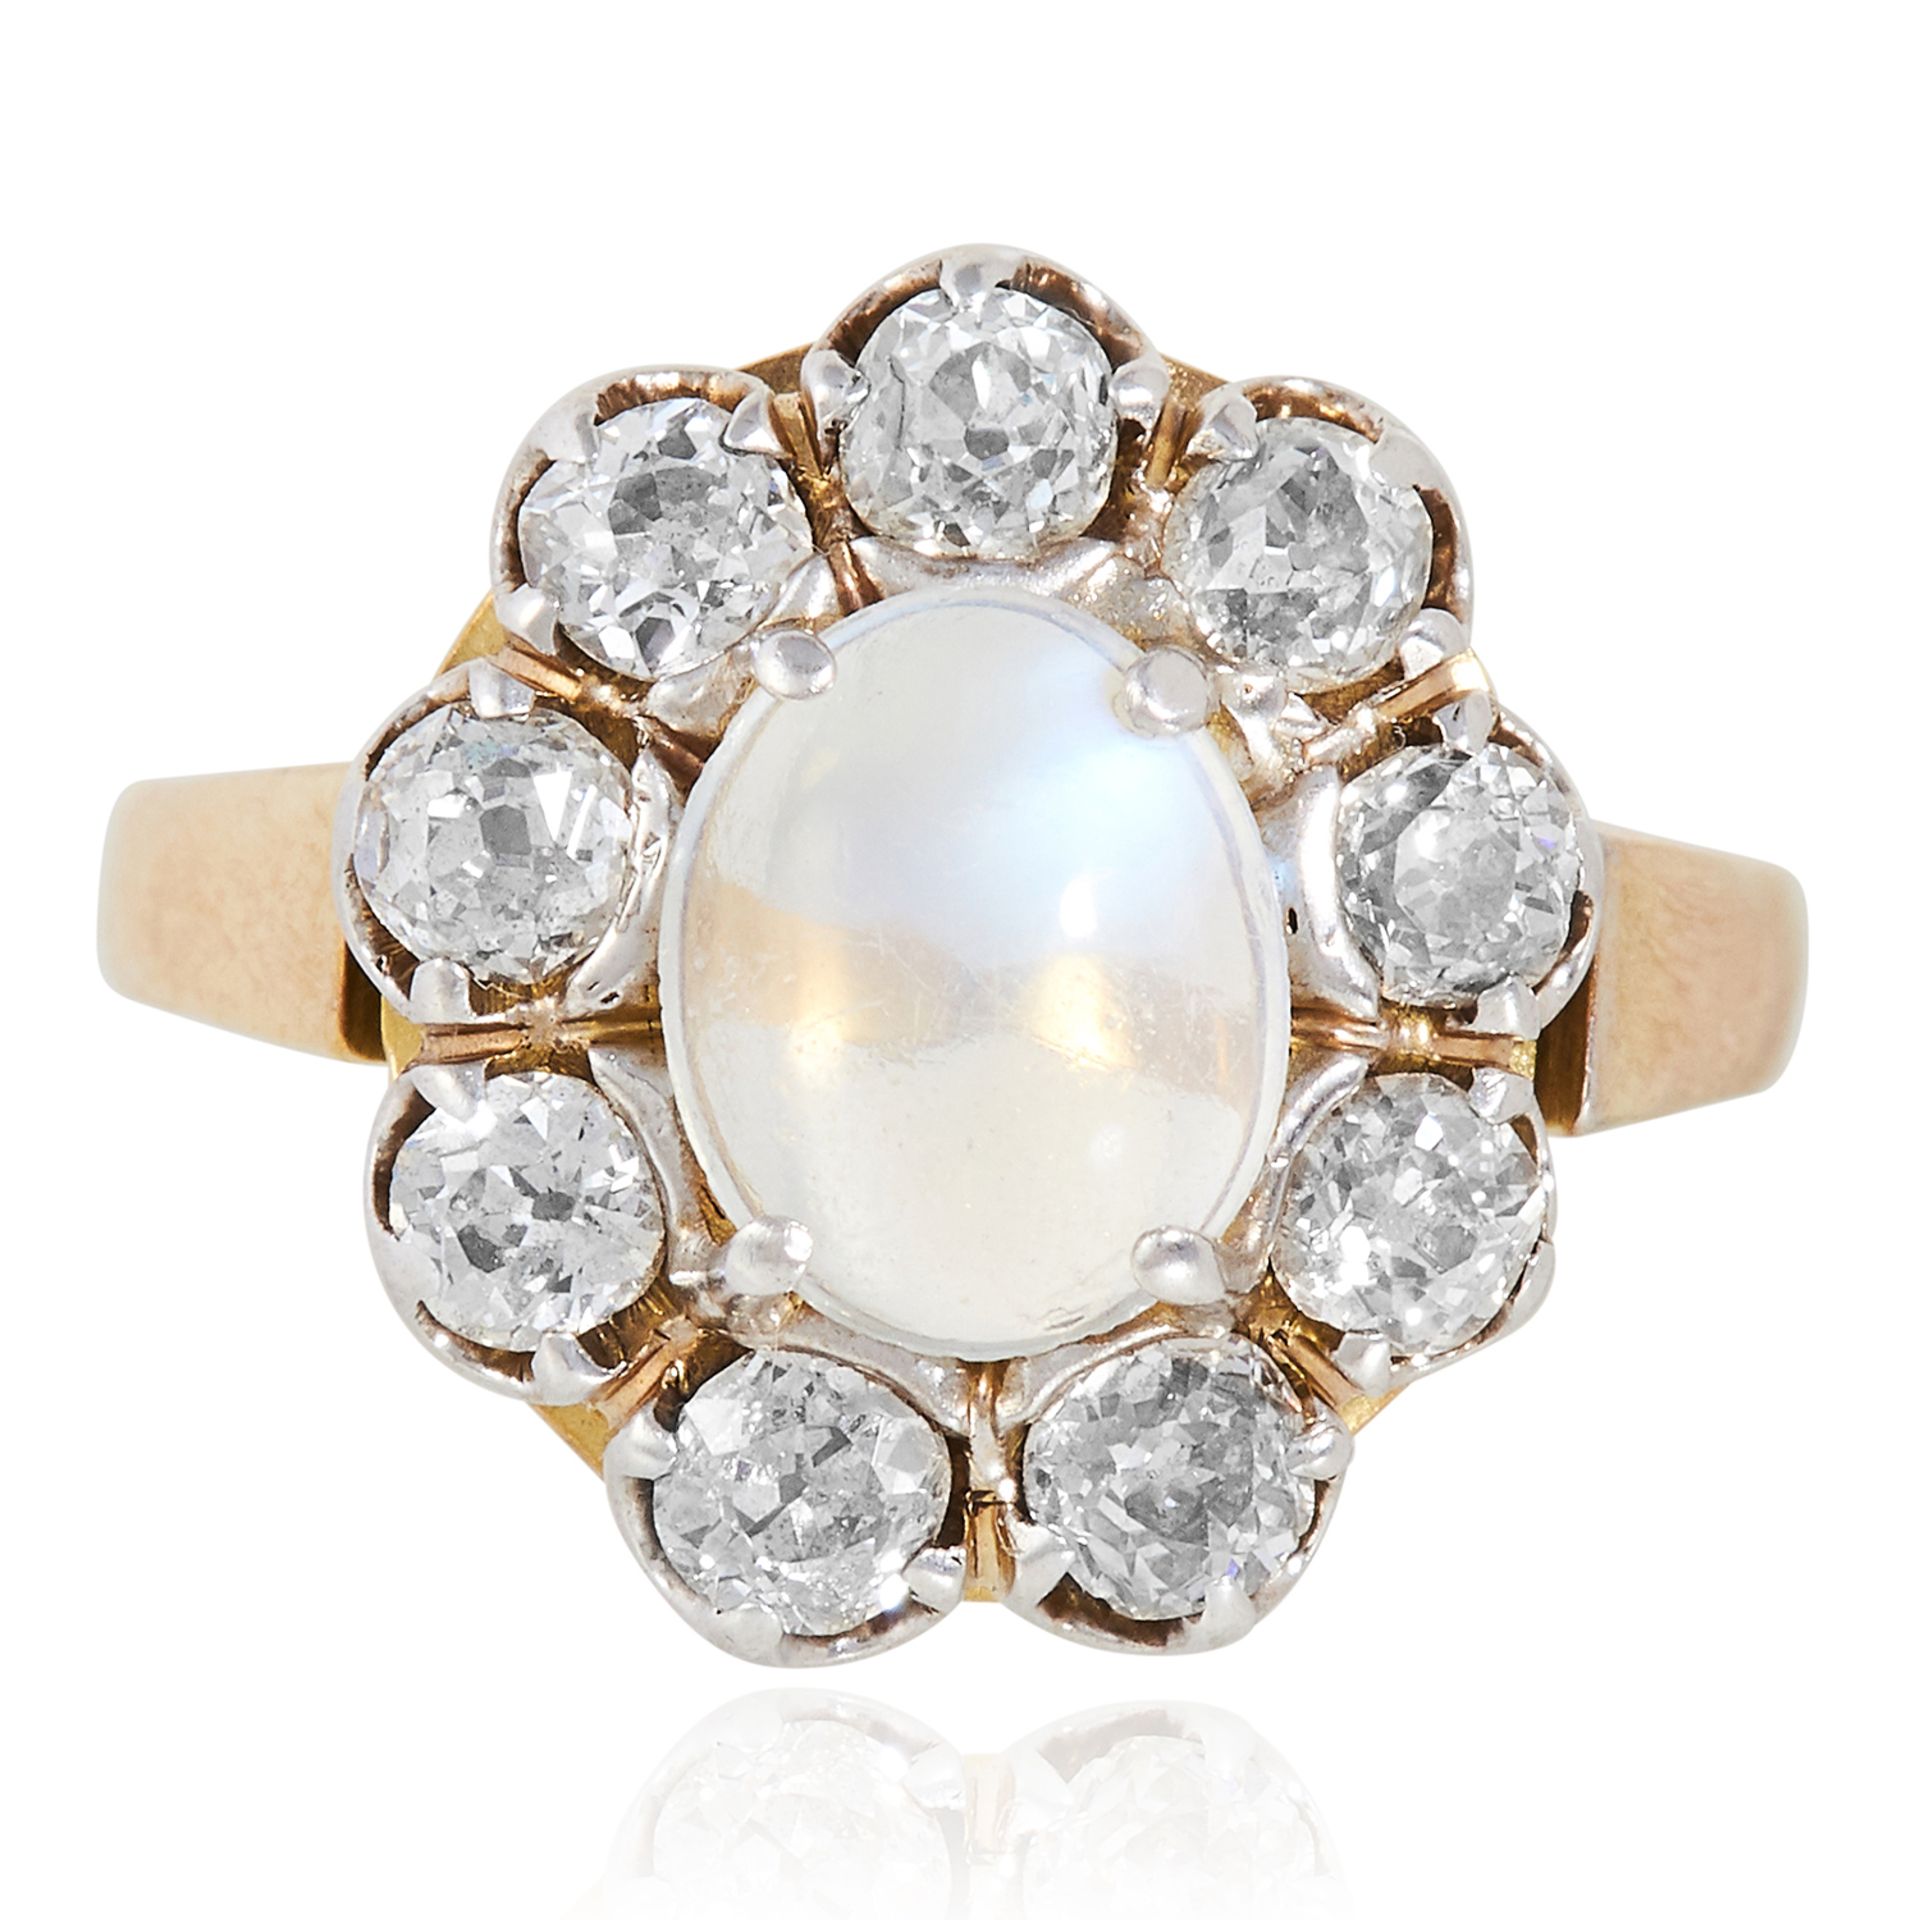 A MOONSTONE AND DIAMOND CLUSTER RING in yellow gold, set with a cabochon moonstone in a cluster of